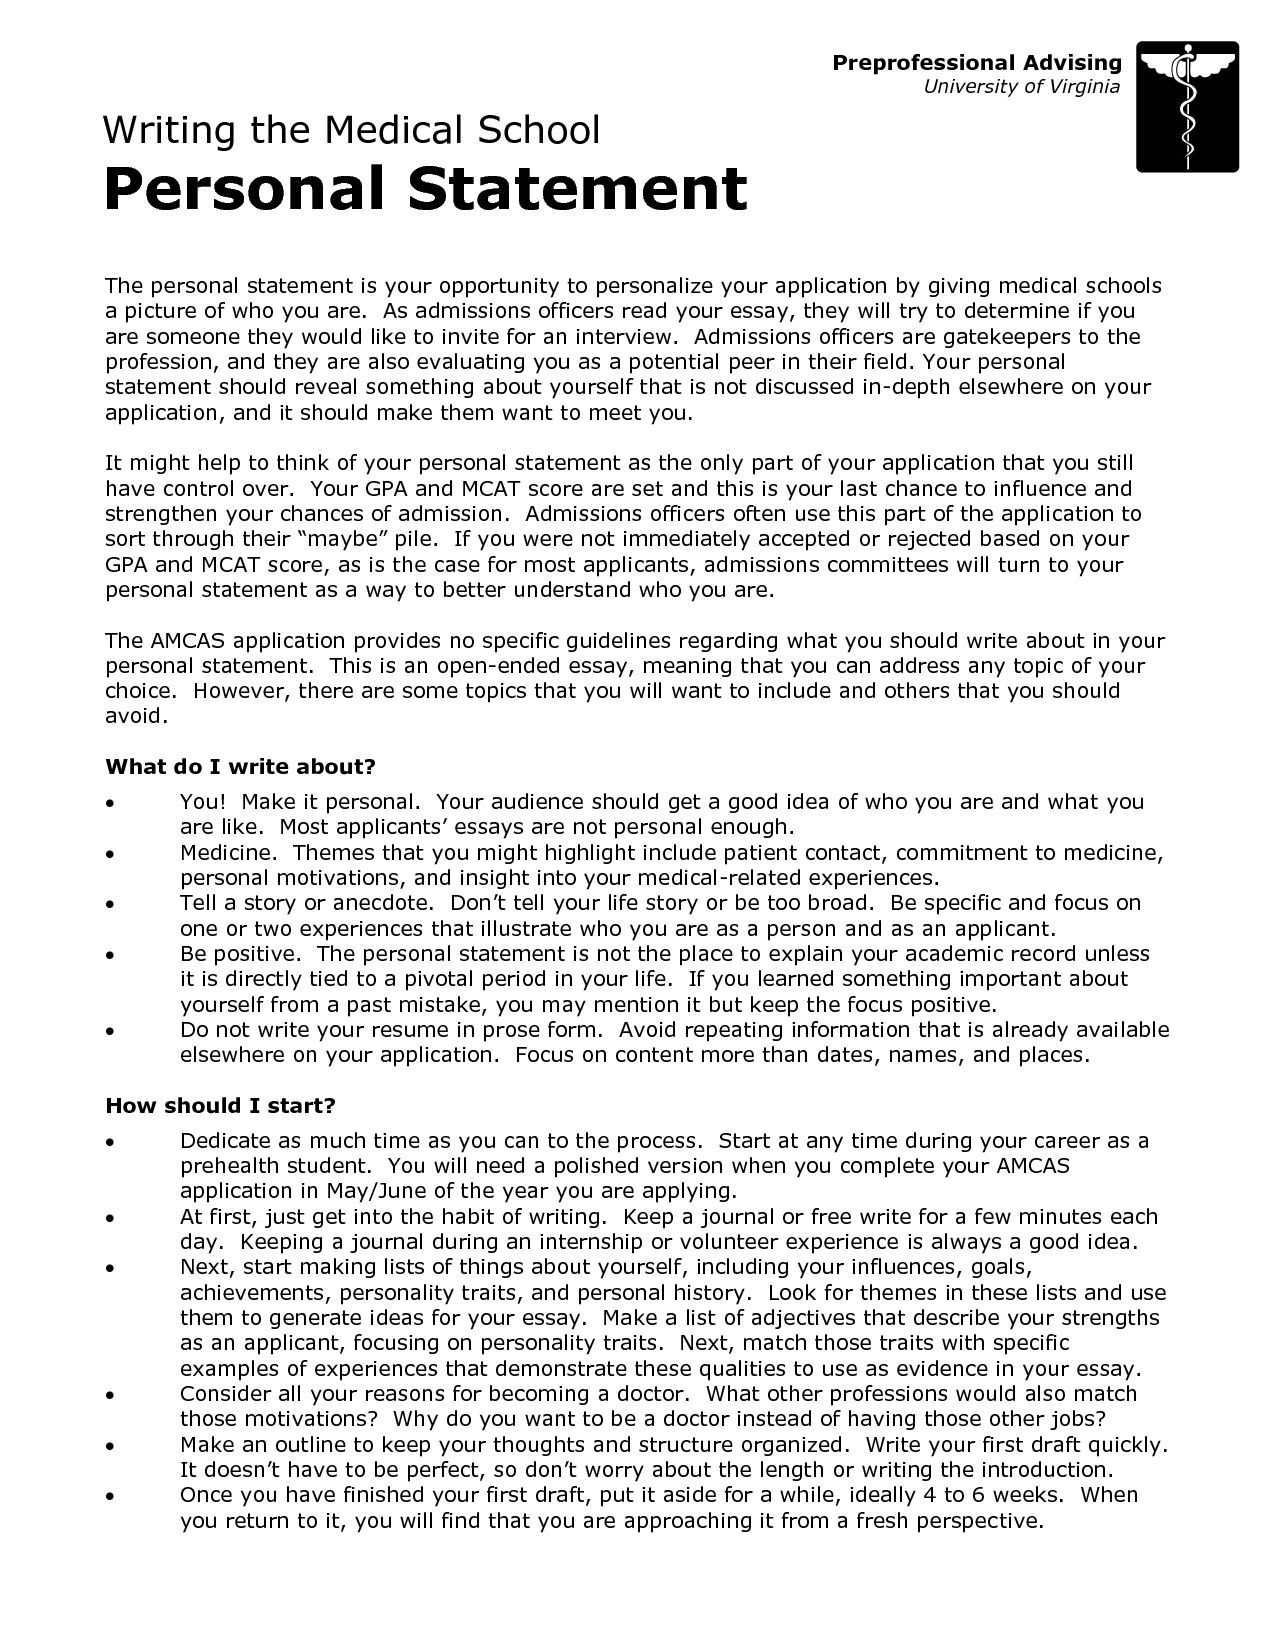 How To Start Writing A Personal Statement For Medical School